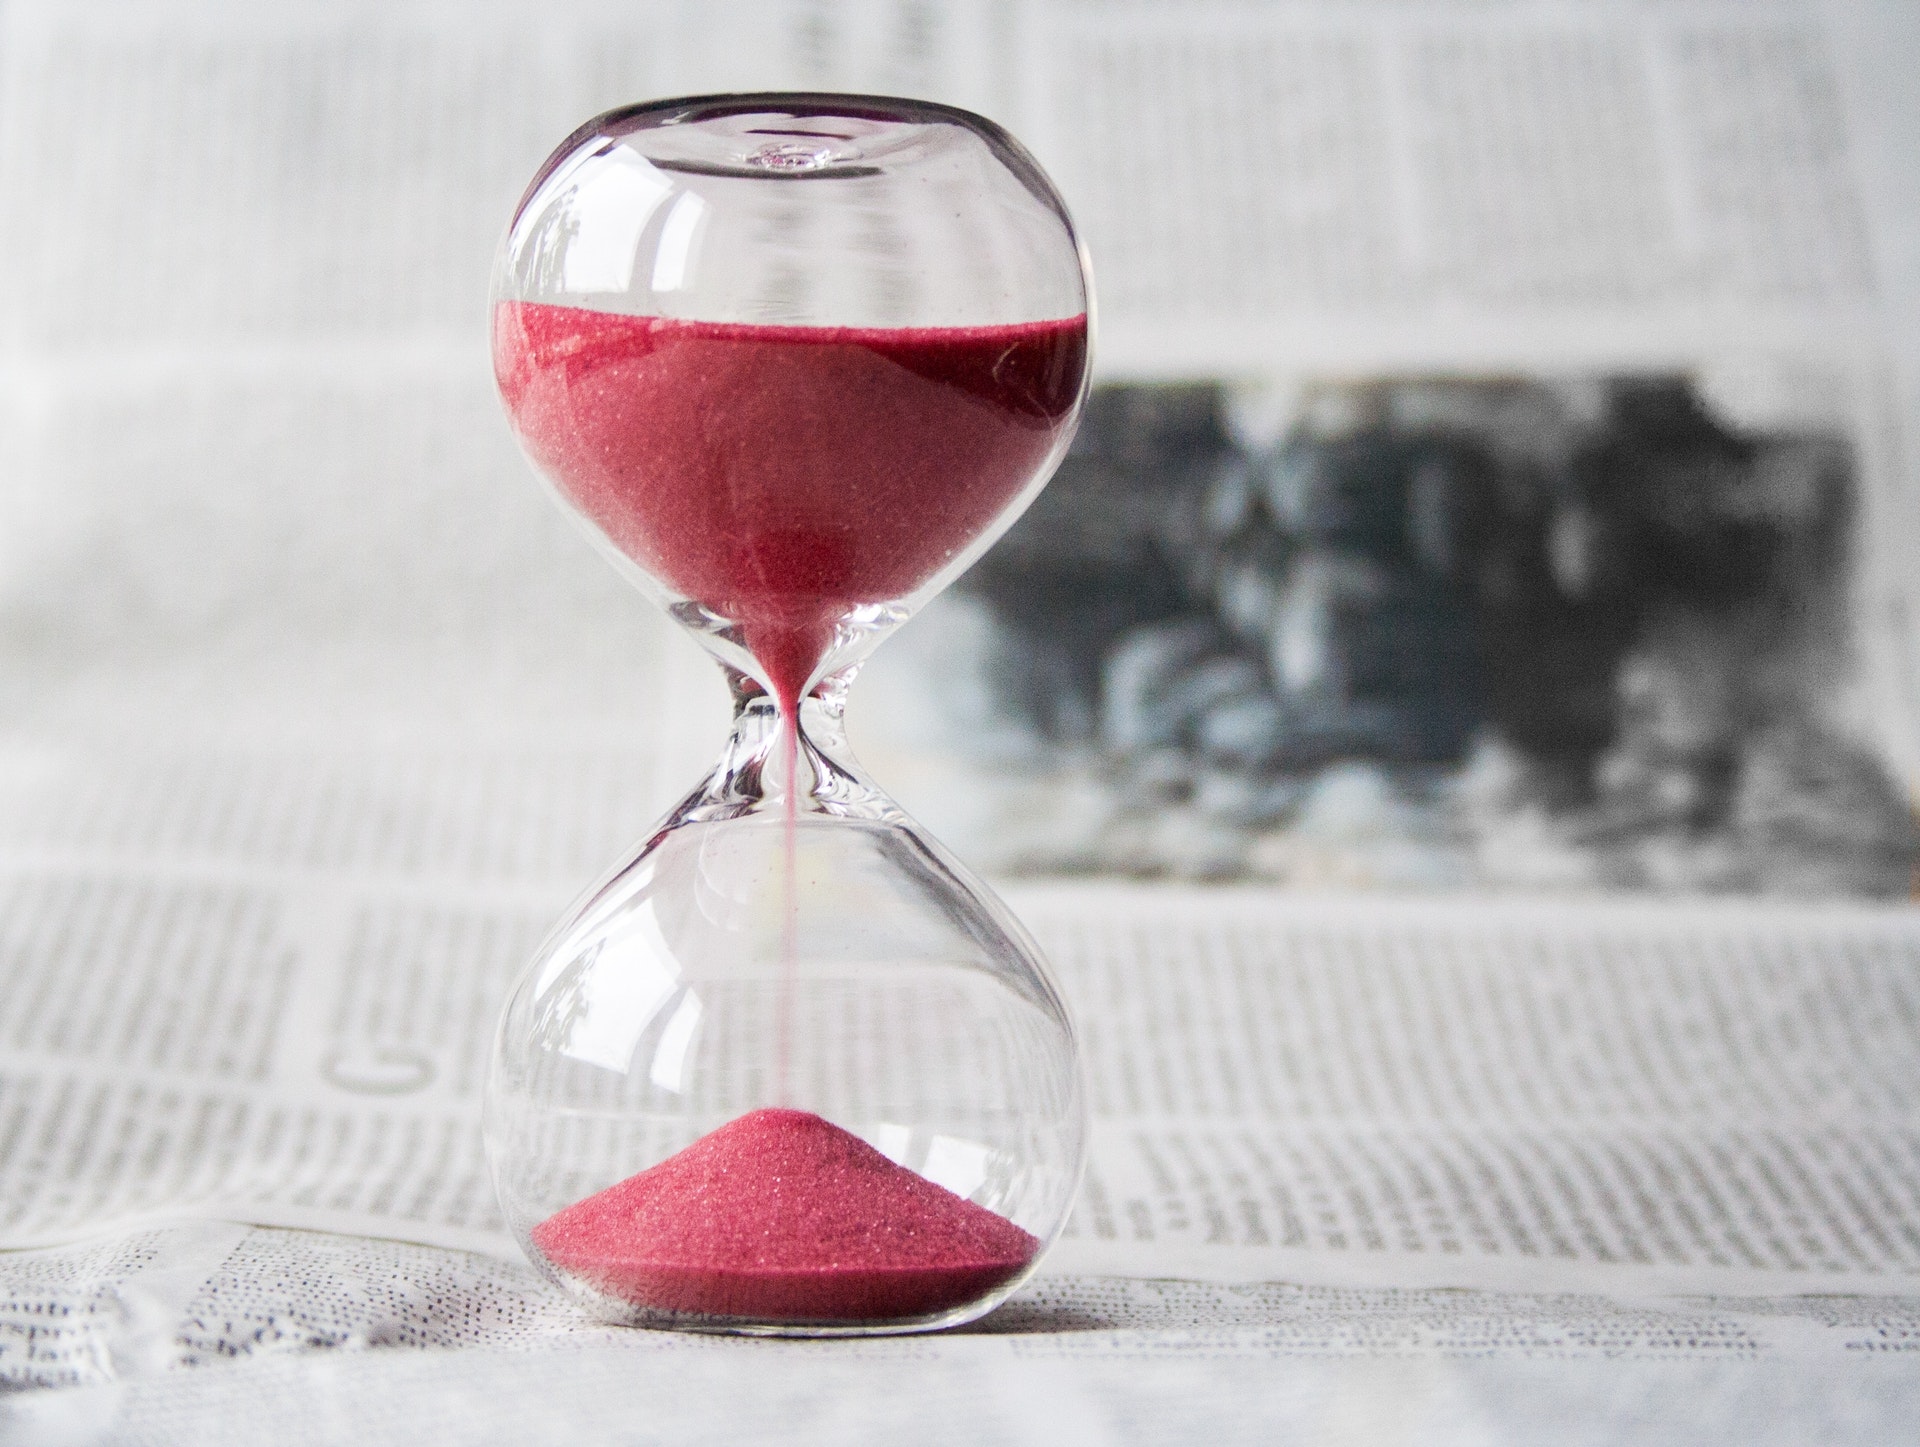 Rethink your time management strategy